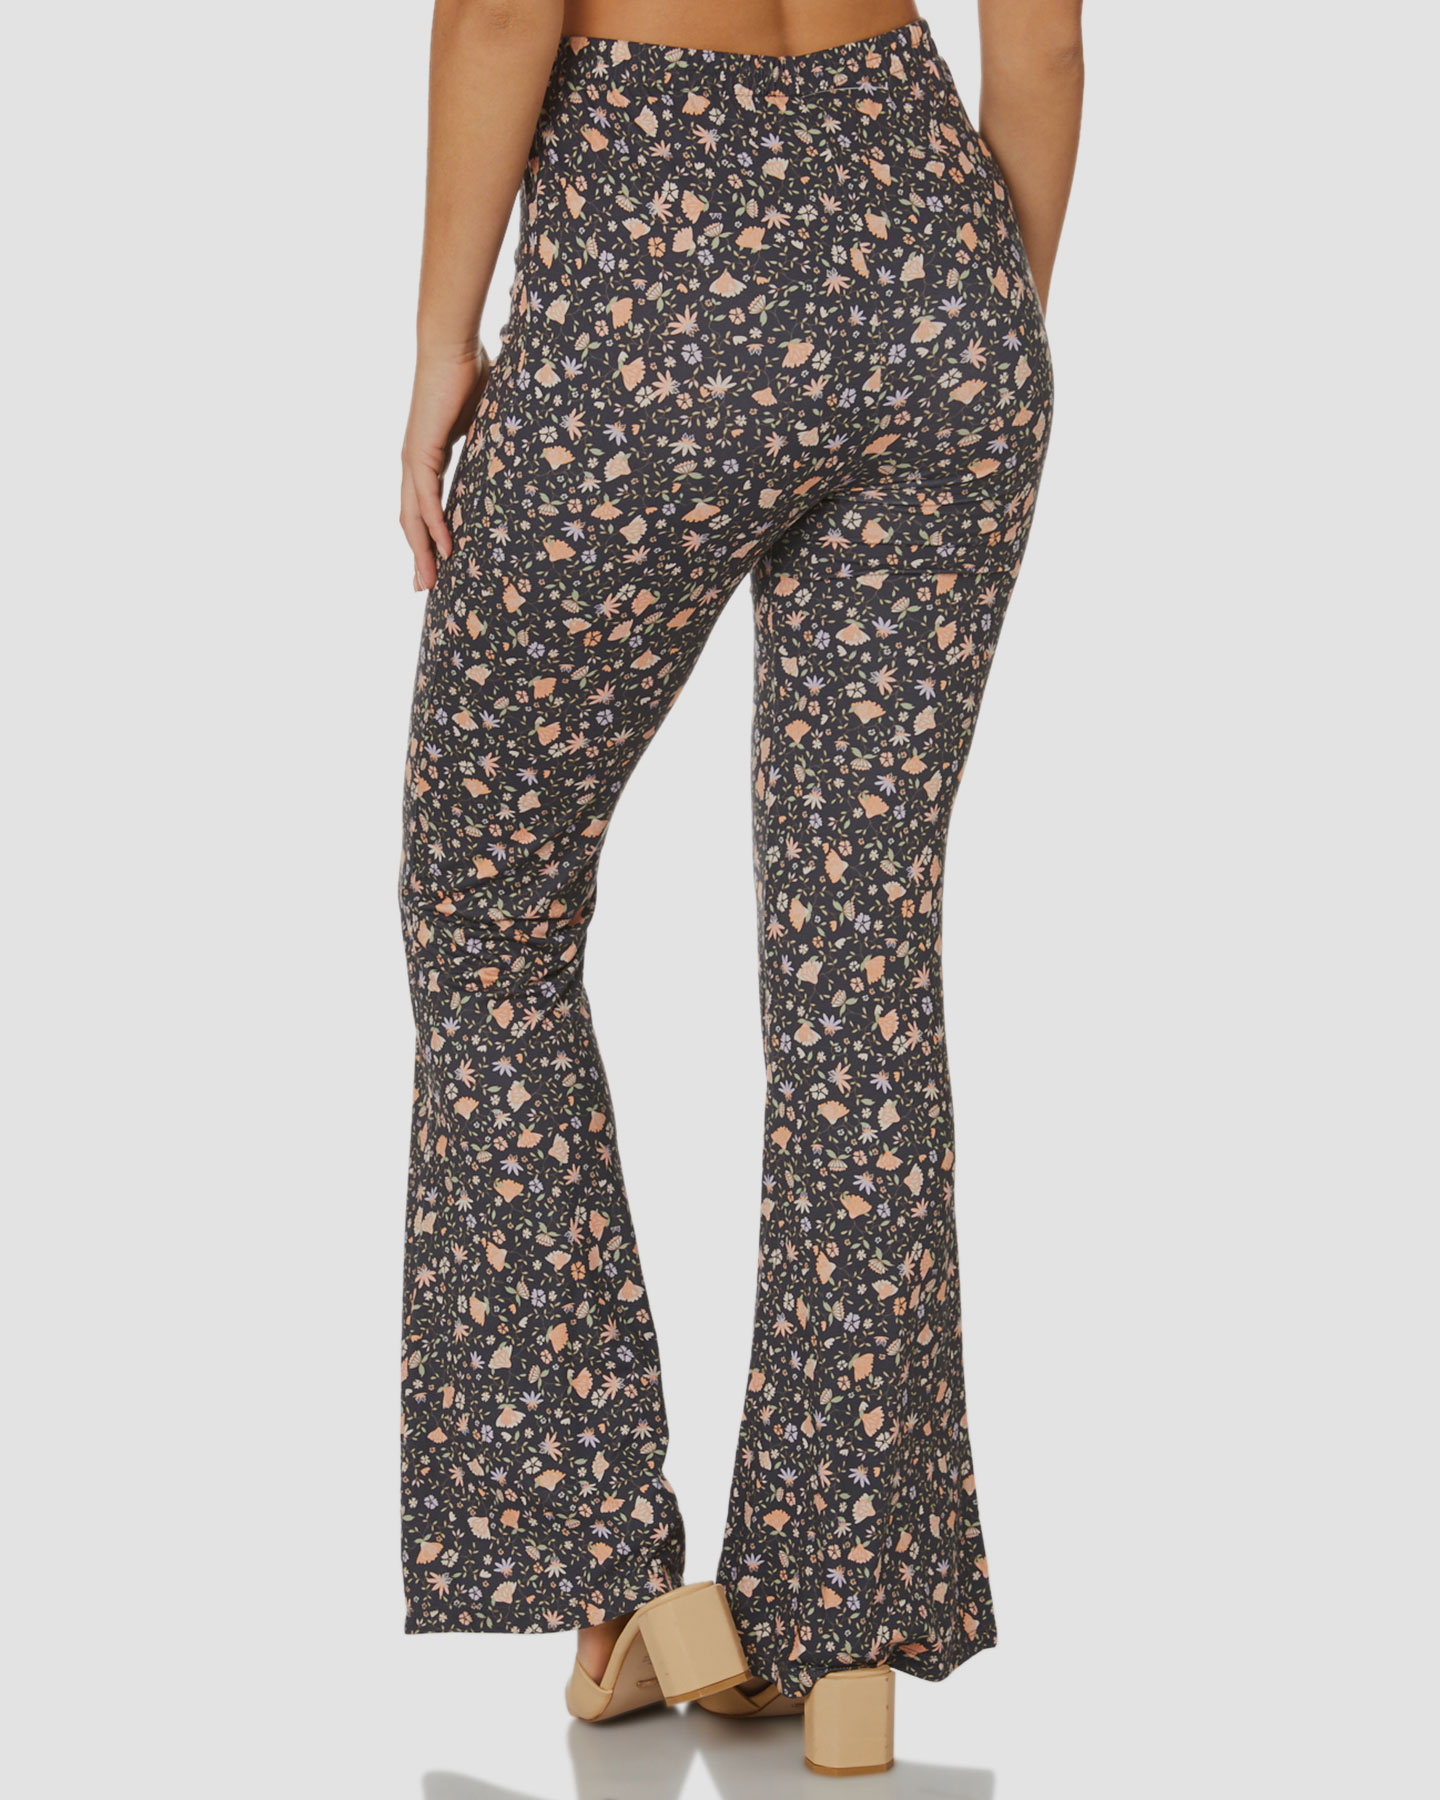 All About Eve Kendall Pant - Kendall Print | SurfStitch